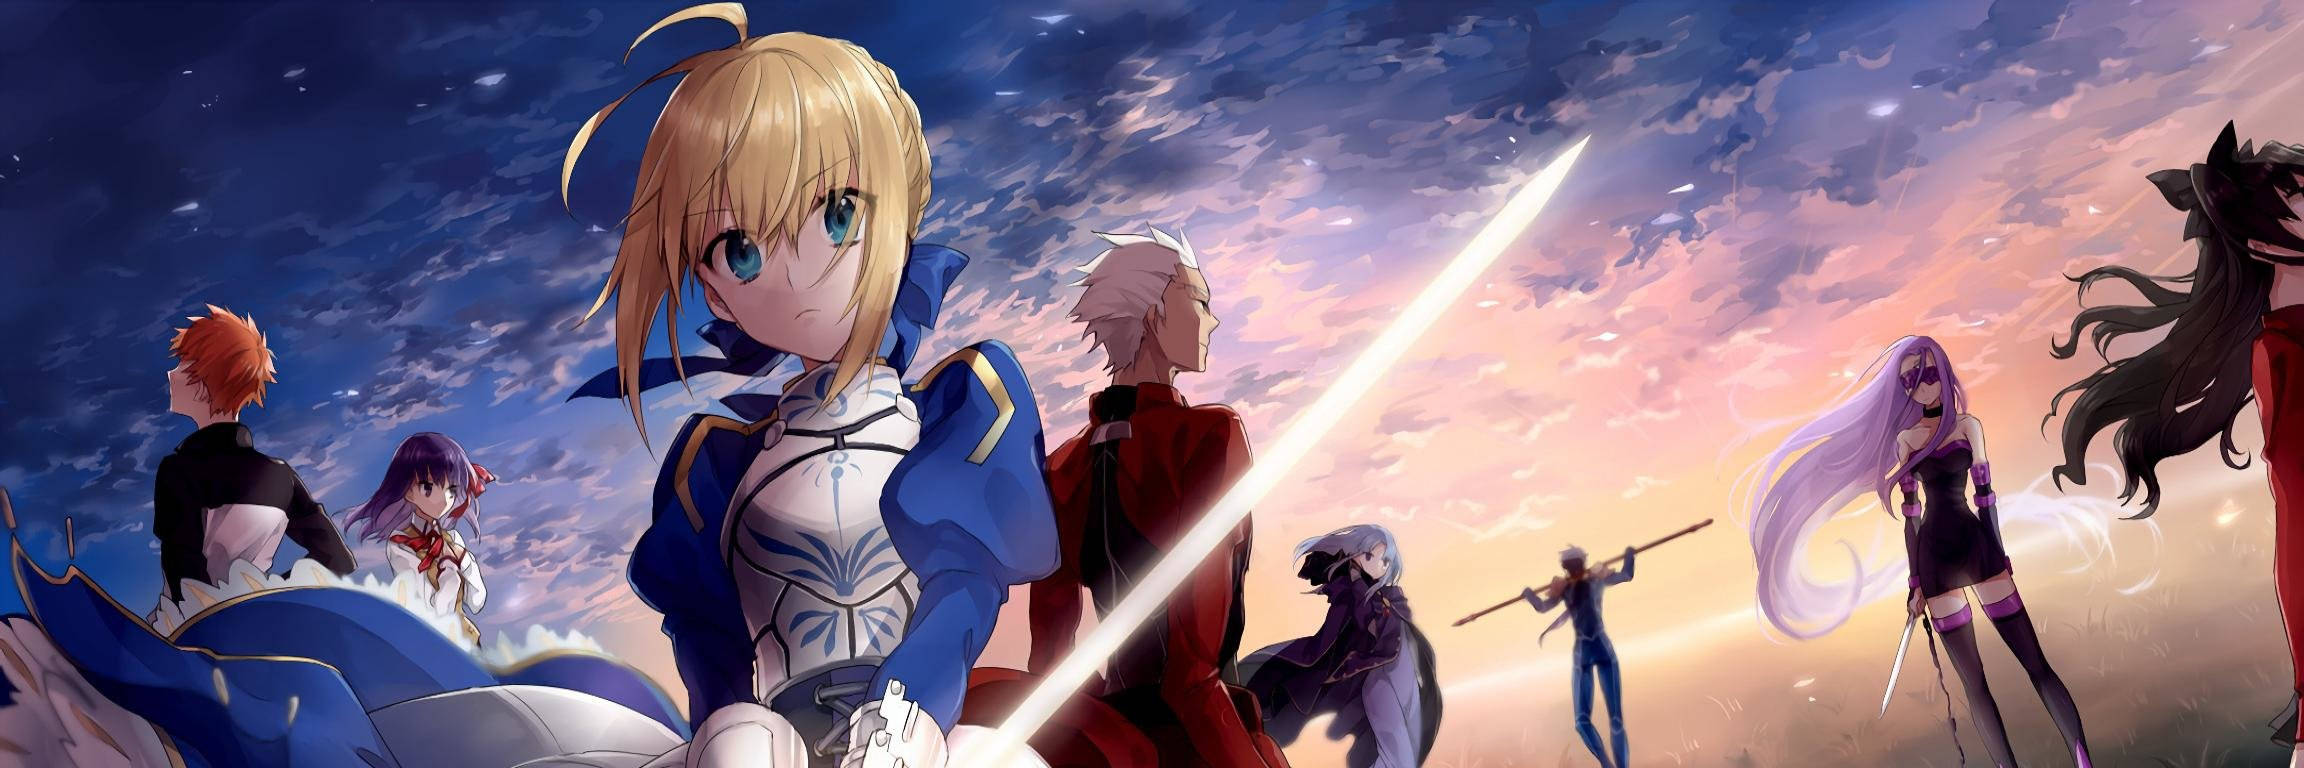 Fate / Stay Night Anime Characters Background